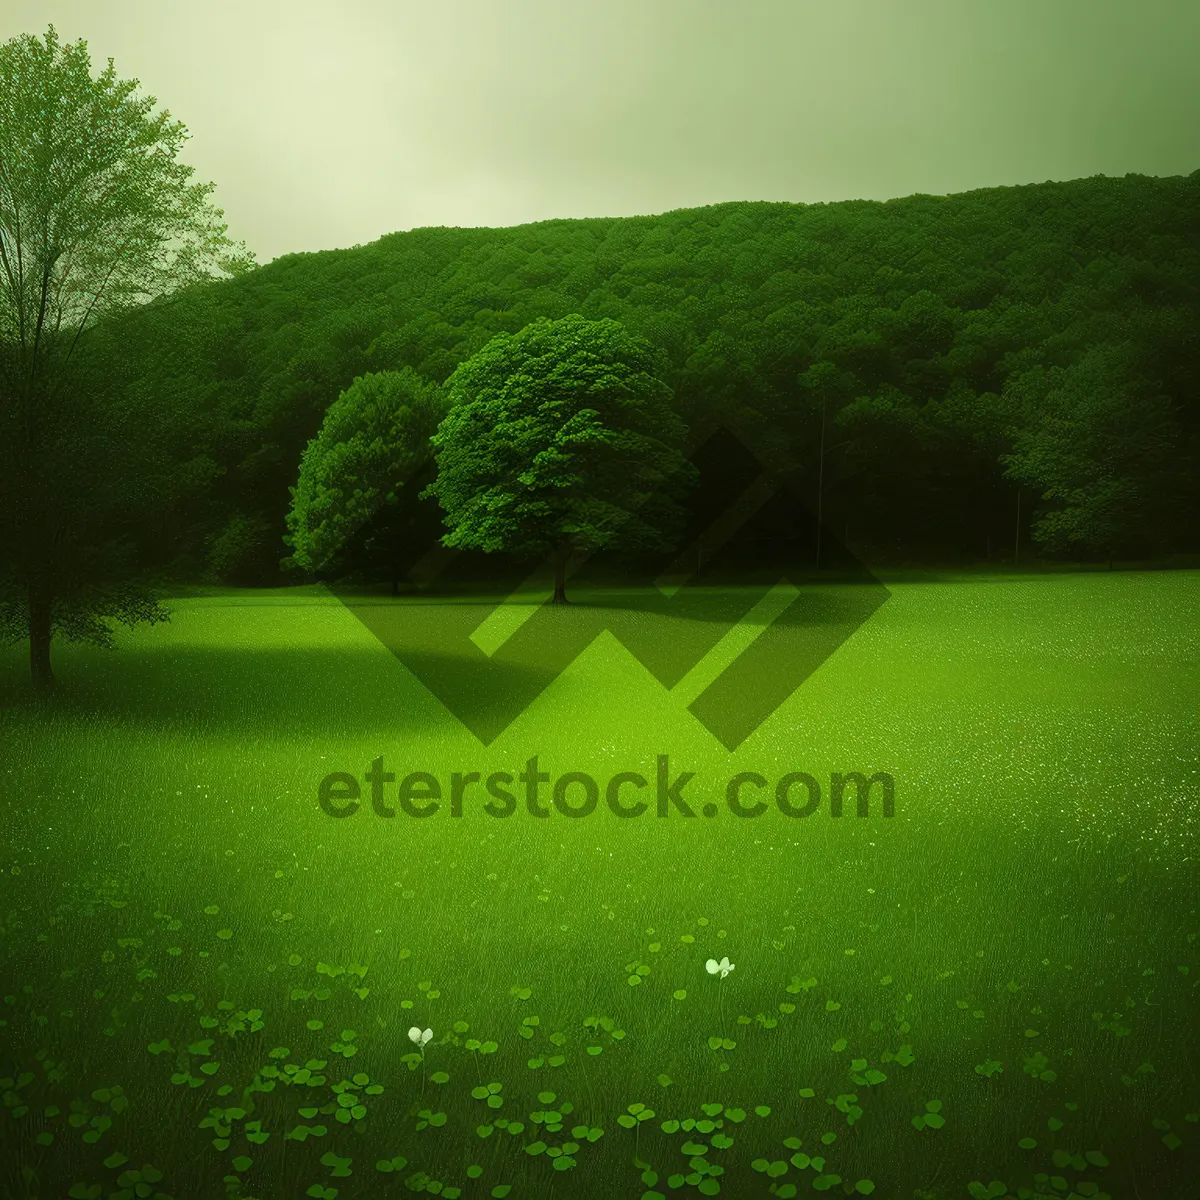 Picture of Serene Summer Landscape with Tree and River